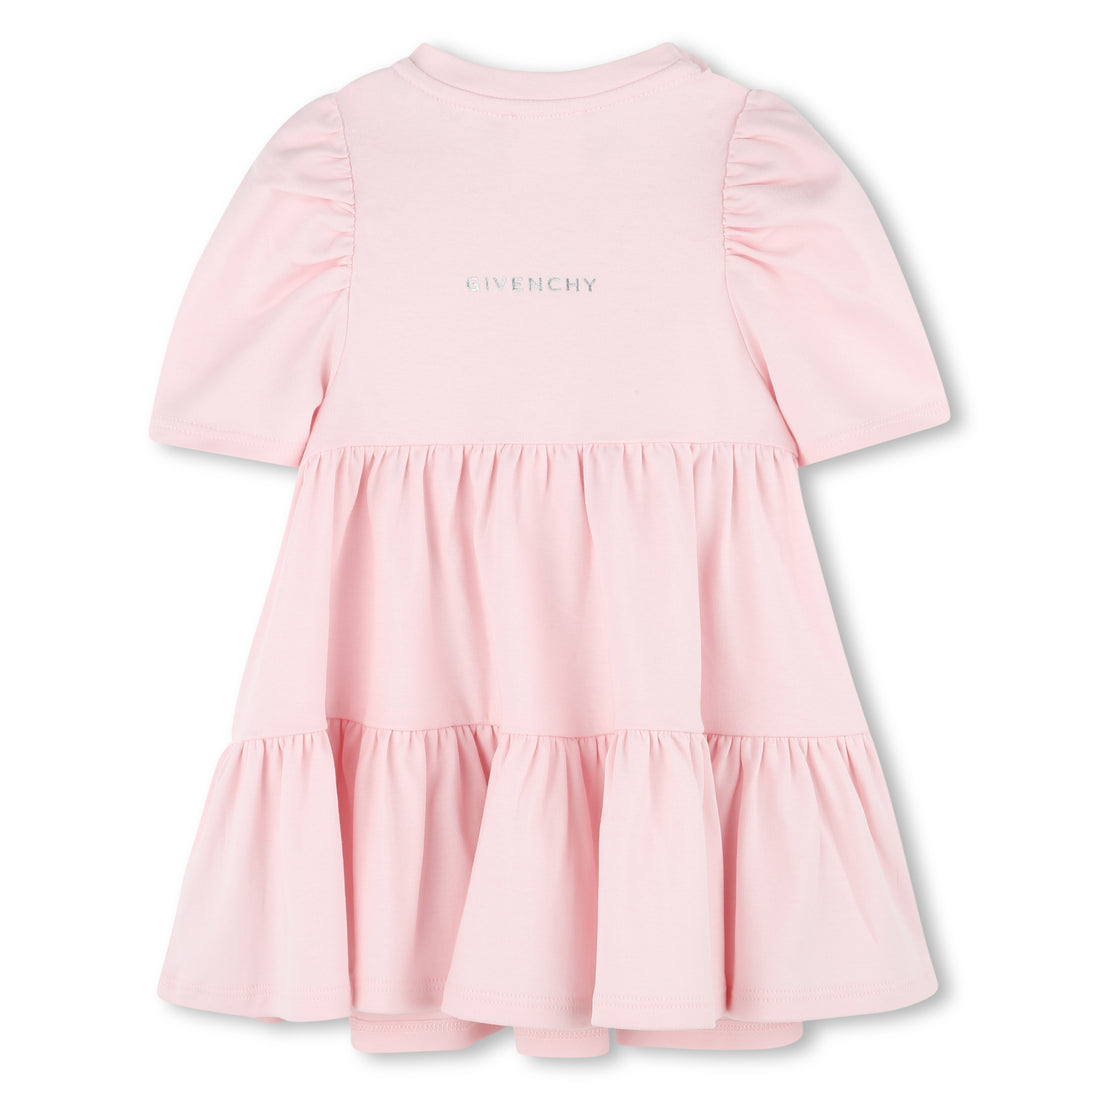 Givenchy Dress Marshmallow Pink - Elegant and Comfortable for Kids | Schools Out